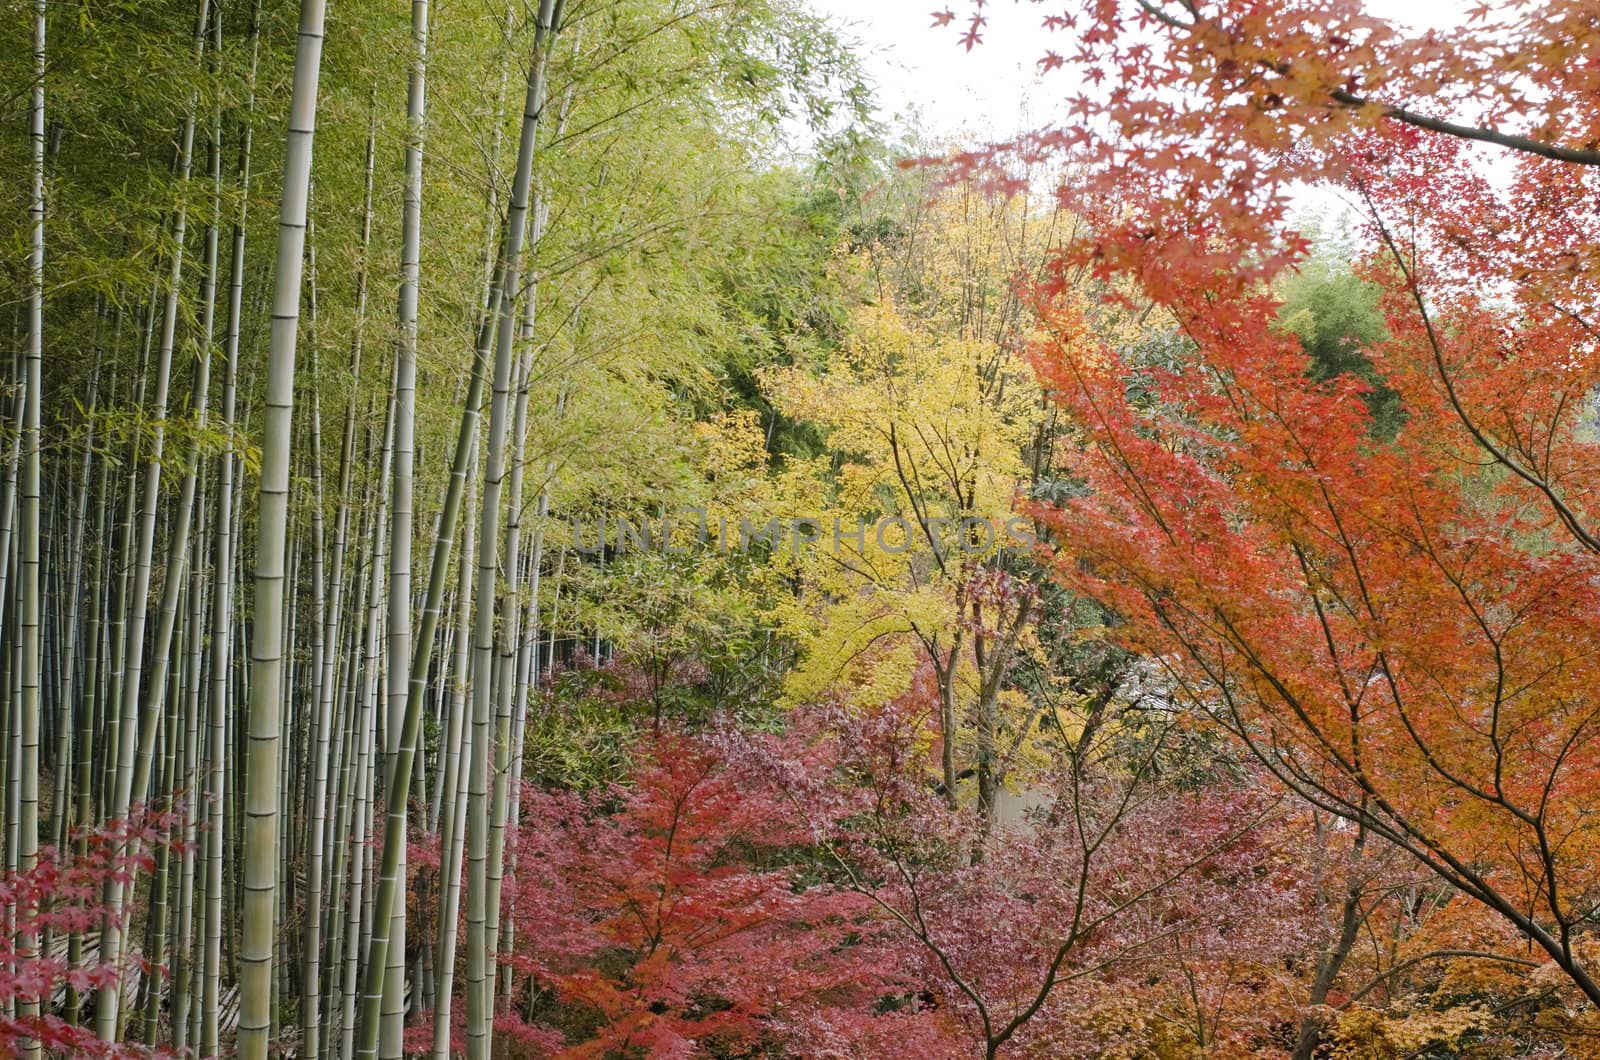 Colorful japanese autumn scene in a forest with maple and bamboo